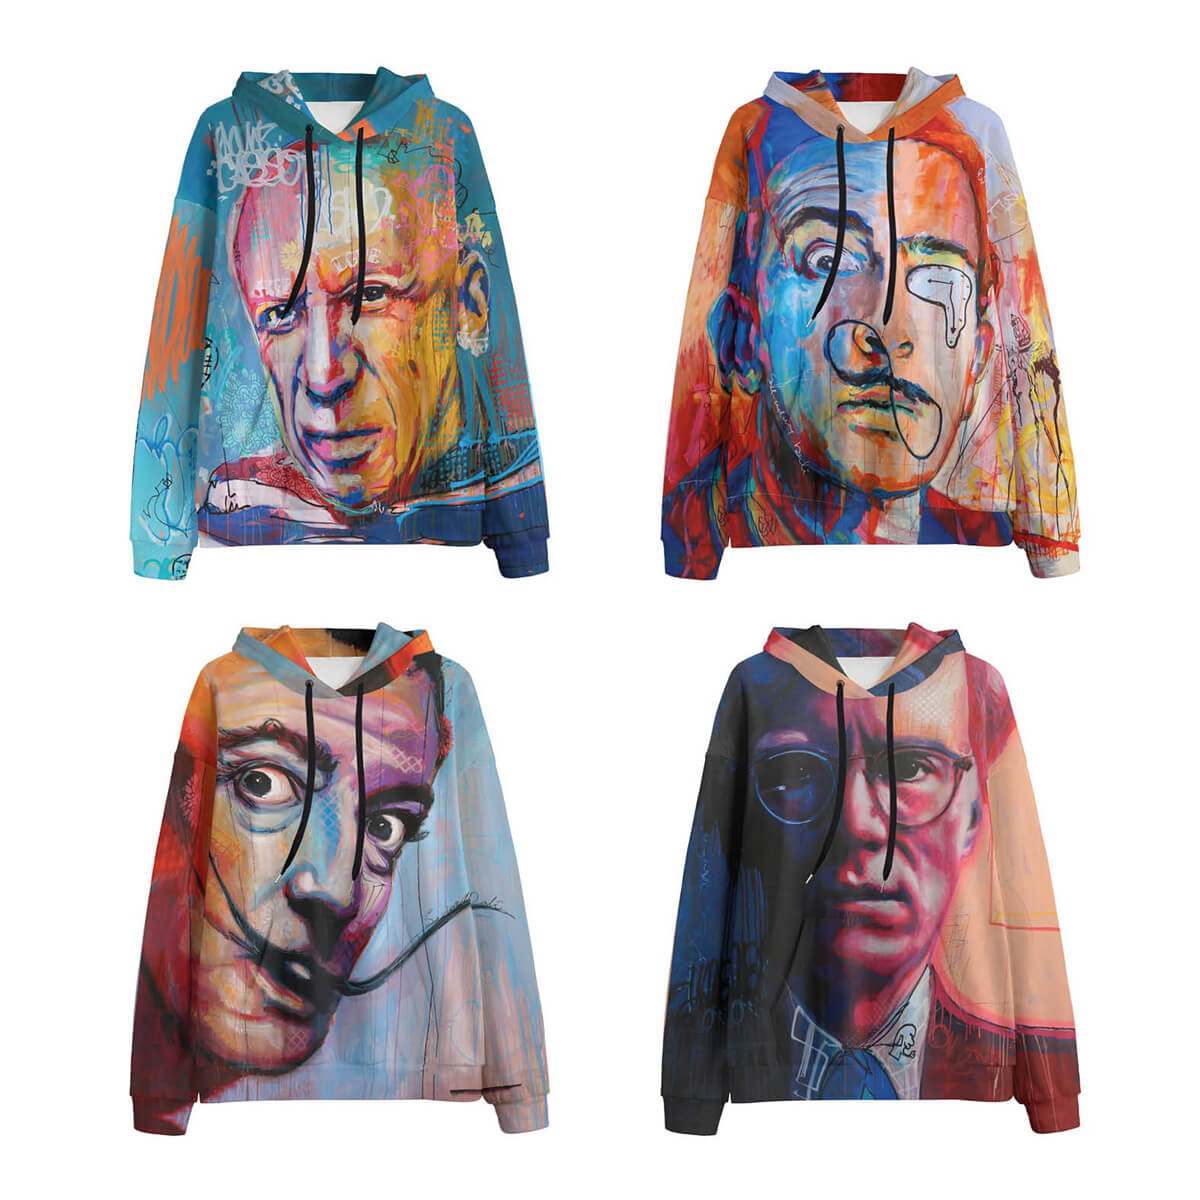 Unique design inspired by Andy Warhol's iconic pop art portraits